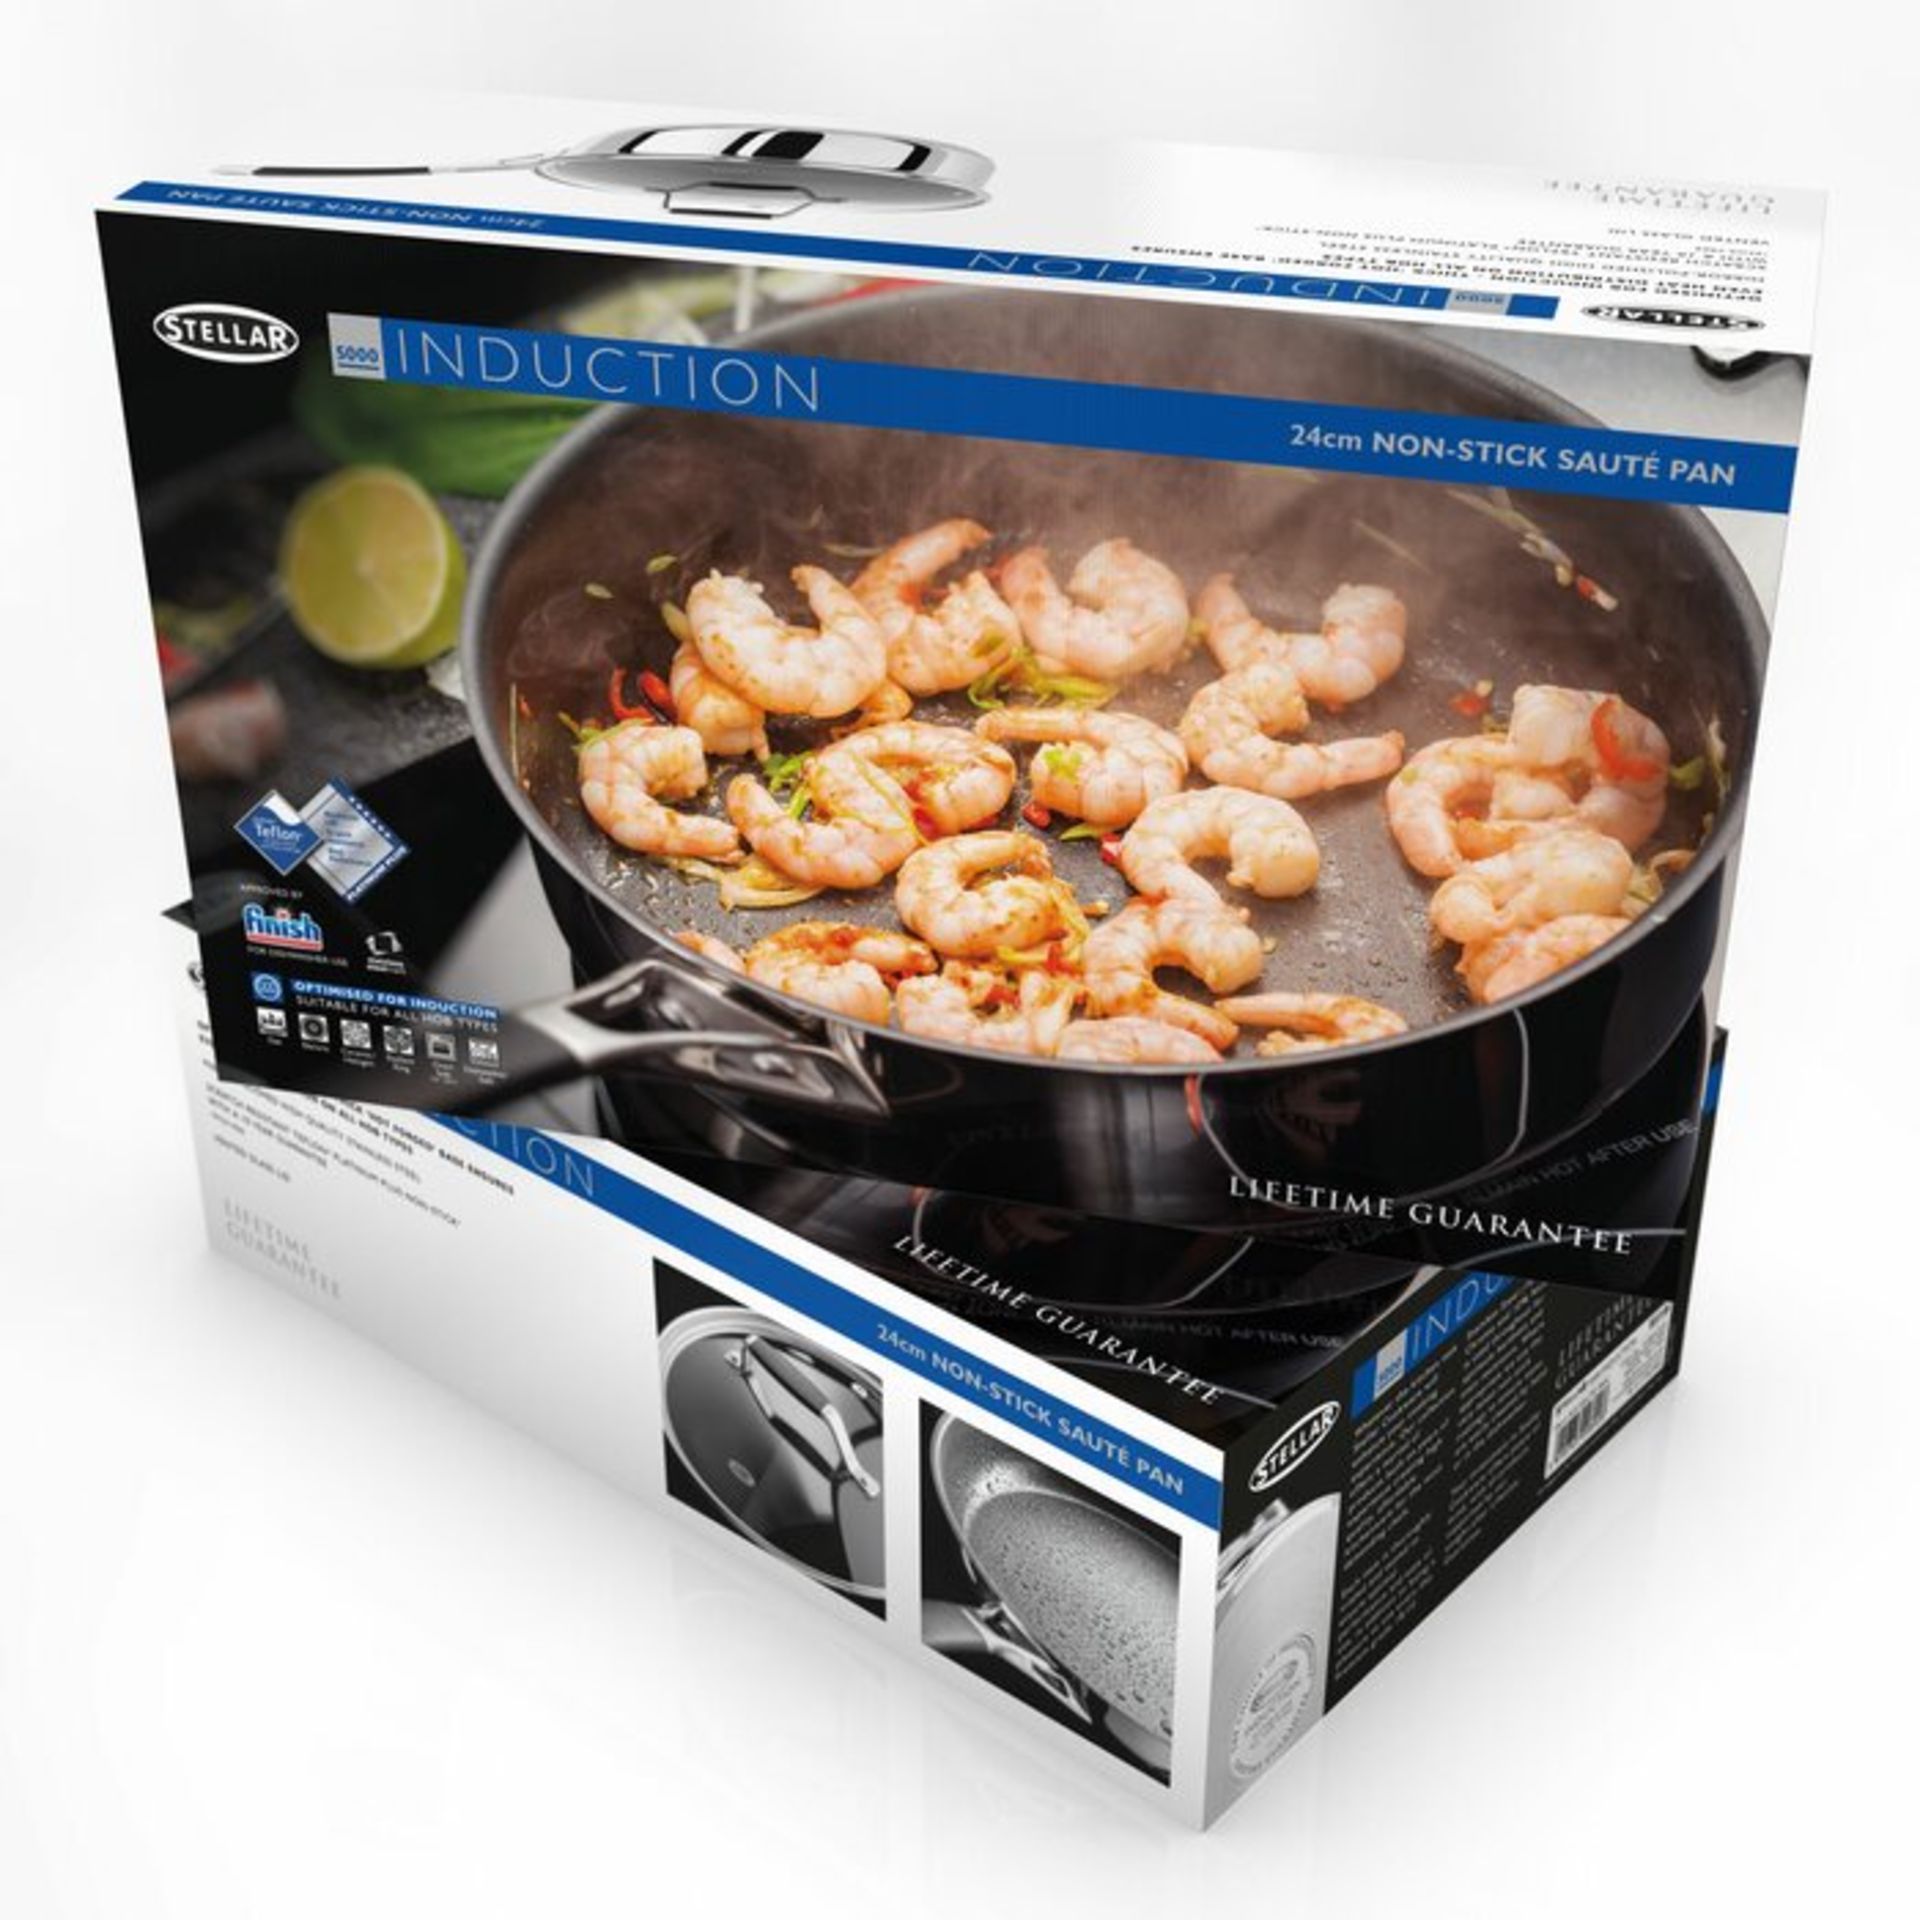 Induction Non-Stick Saute Pan with Lid - RRP £55.04 - Image 2 of 2